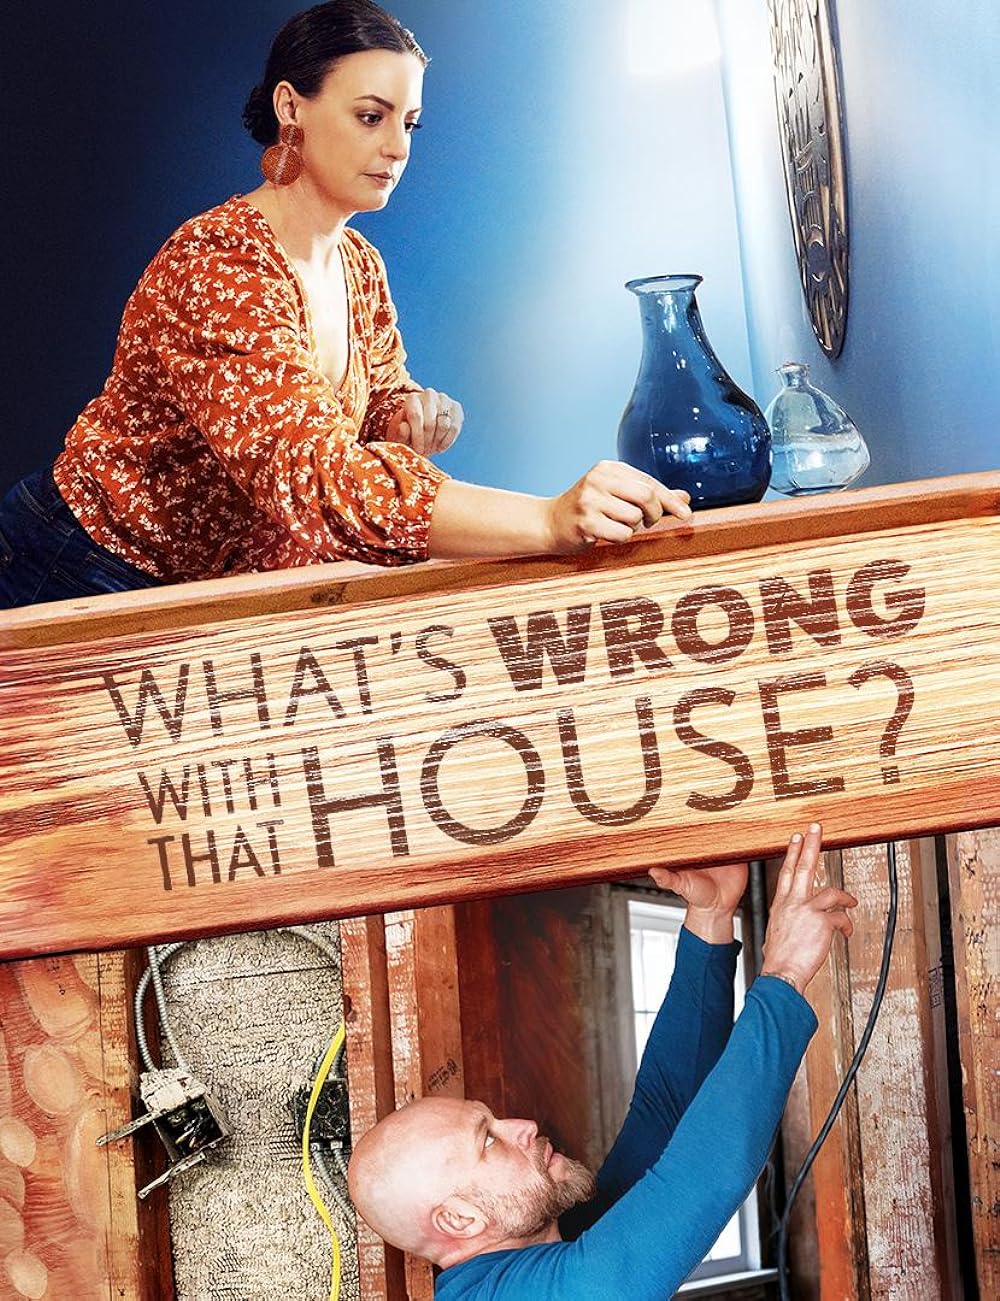 What's Wrong With That House?: Season 1